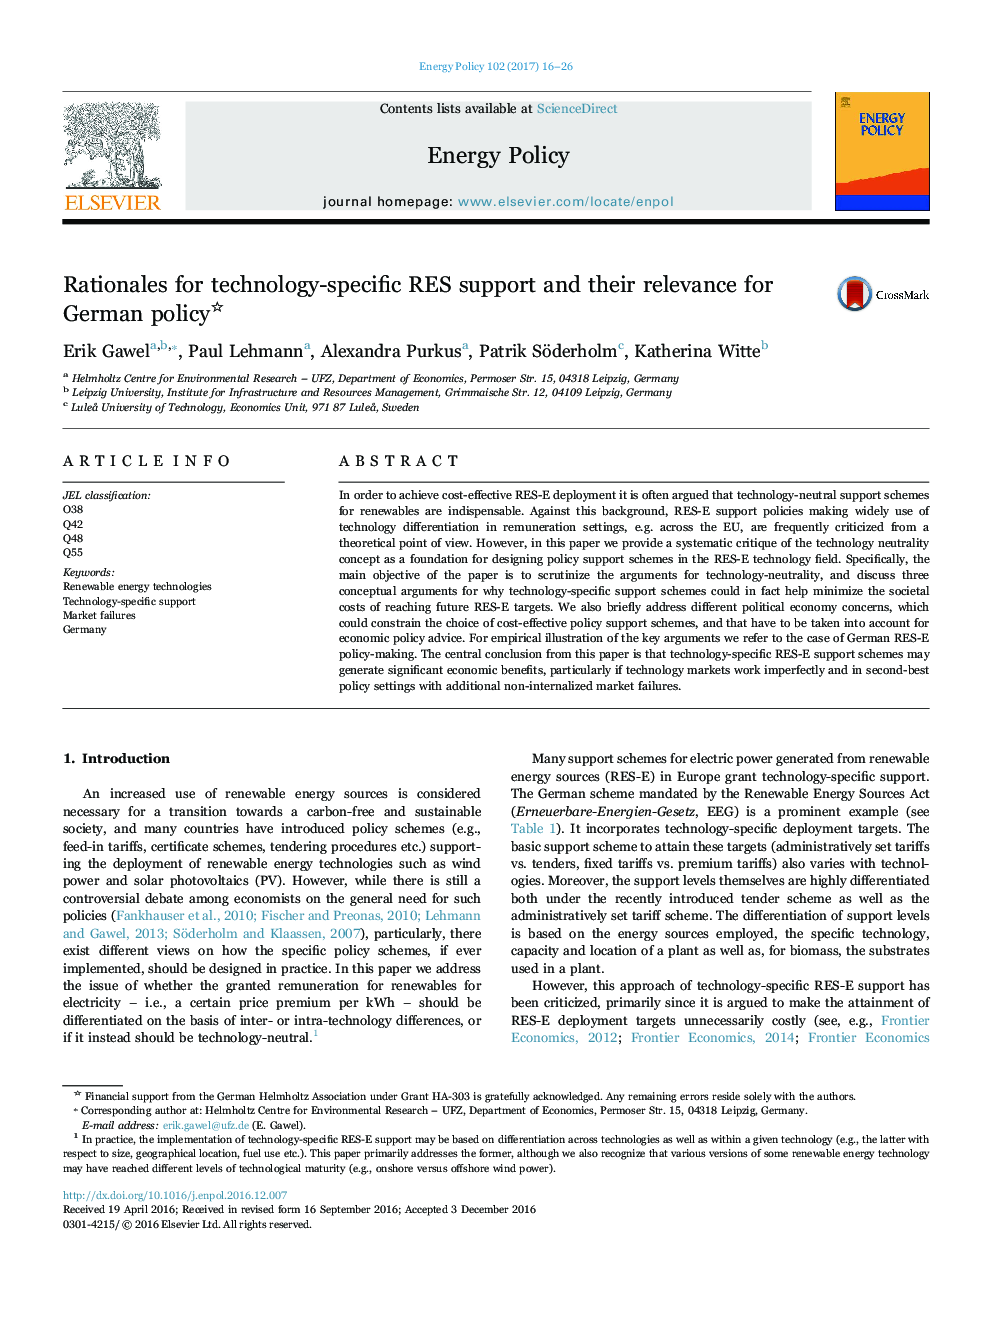 Rationales for technology-specific RES support and their relevance for German policy